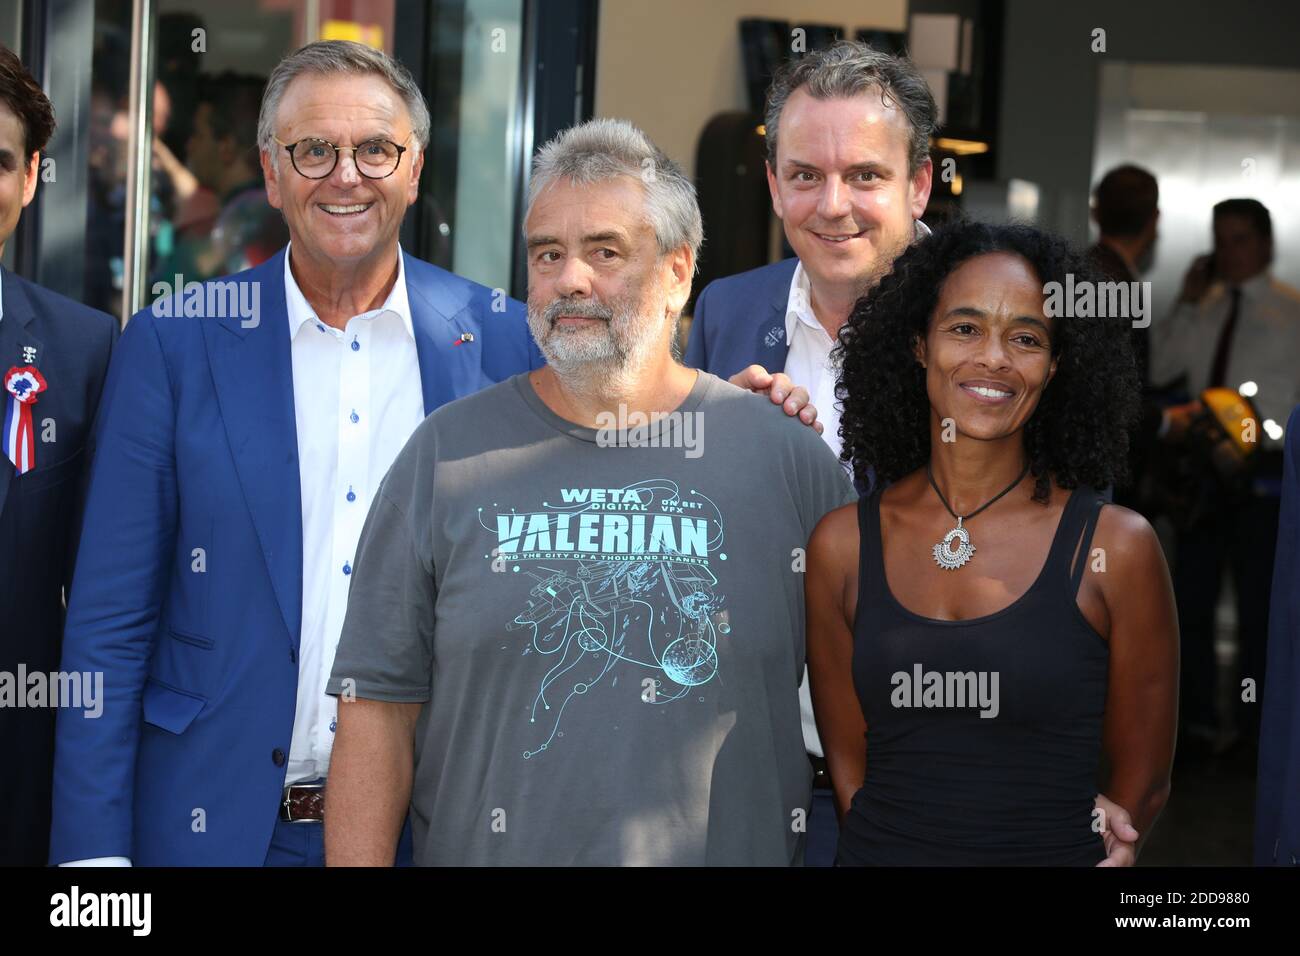 Roland Mack, Michael Mack, Luc Besson and his wife Virginie Besson-Silla attending Eurosat - Coastiality By Valerian Opening held at Europa-Park in Rust, Germany on September 12, 2018. Photo by Jerome Domine/ABACAPRESS.COM Stock Photo